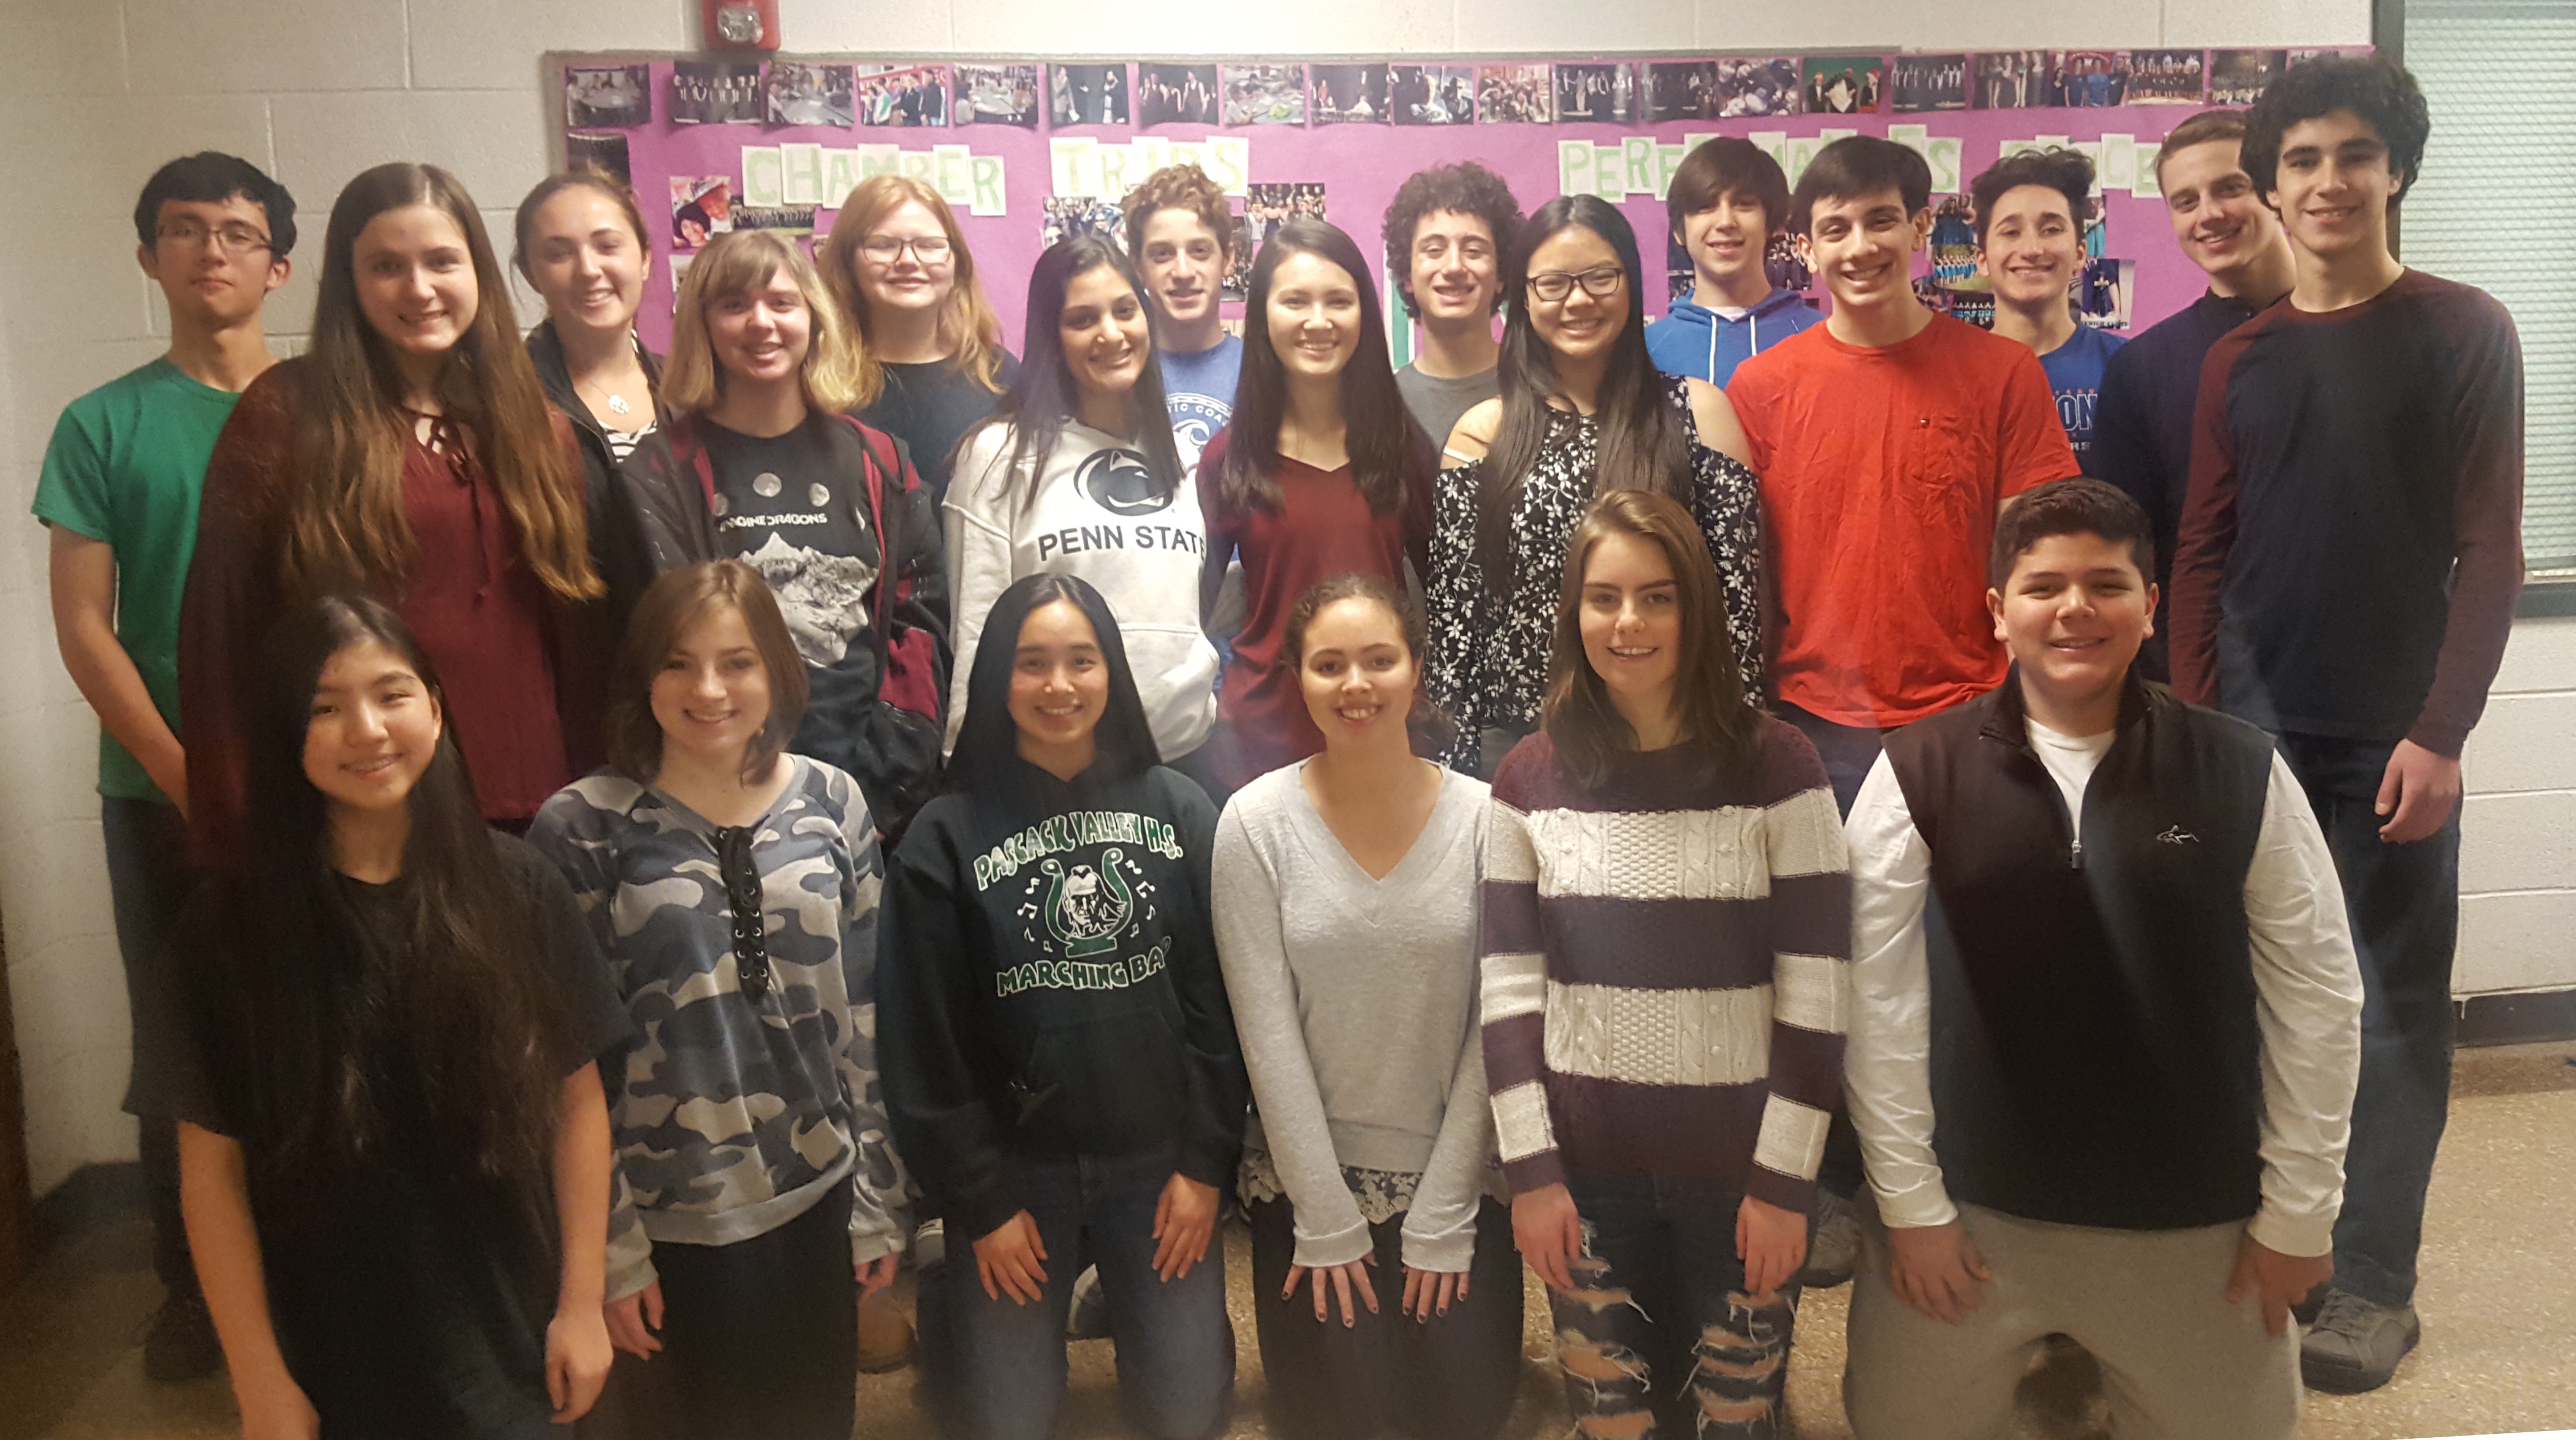 Pascack Valley High School to induct music honor society students at